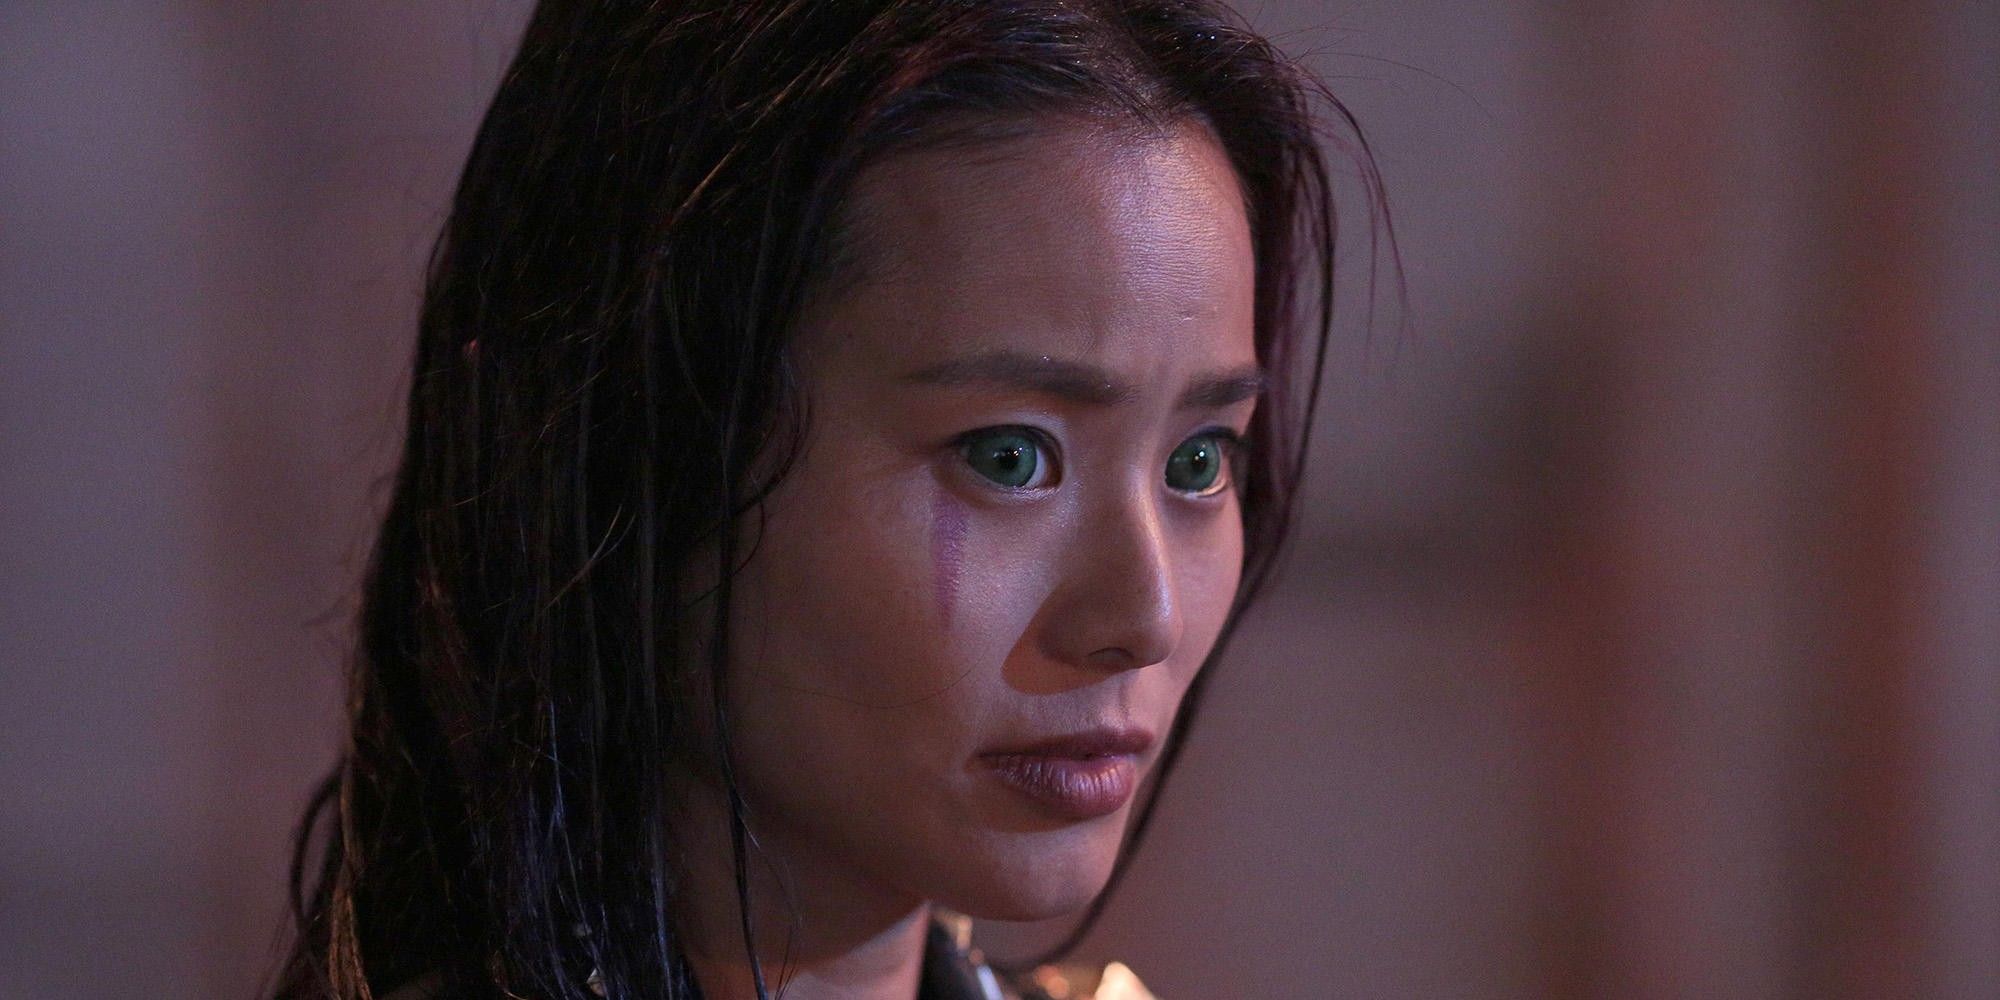 Jamie Chung as Blink Clarice in The Gifted